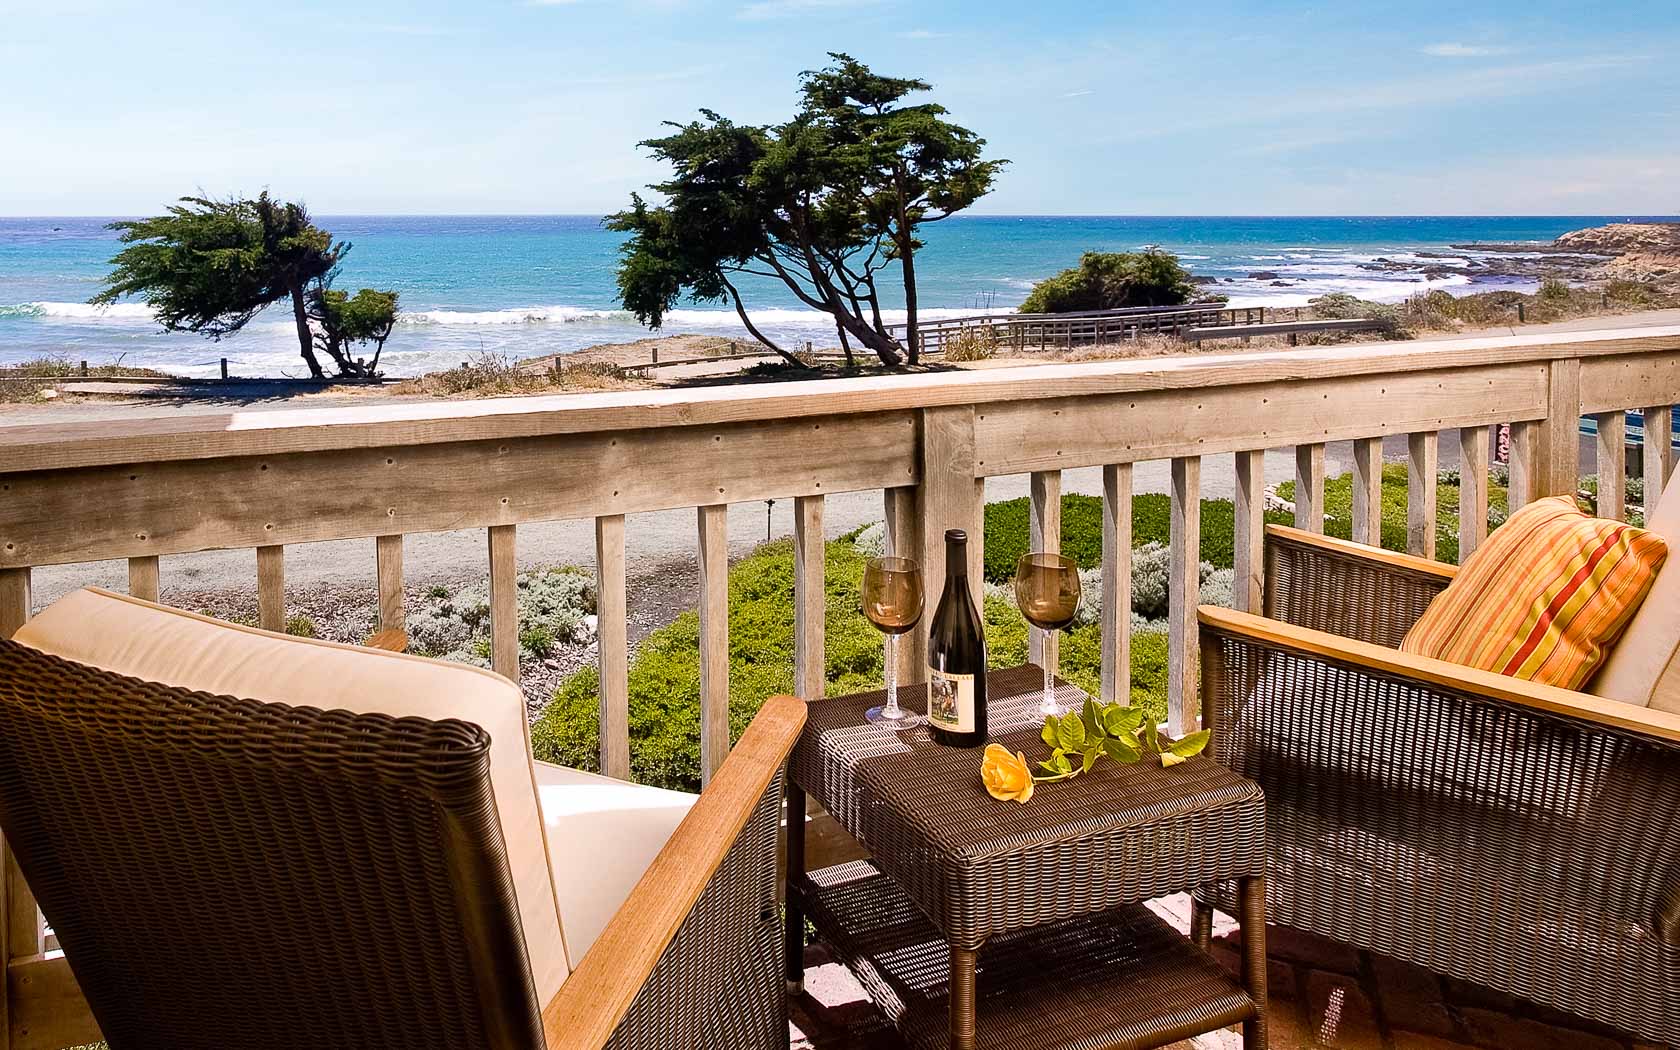 Wine and chairs on the balcony with ocean views